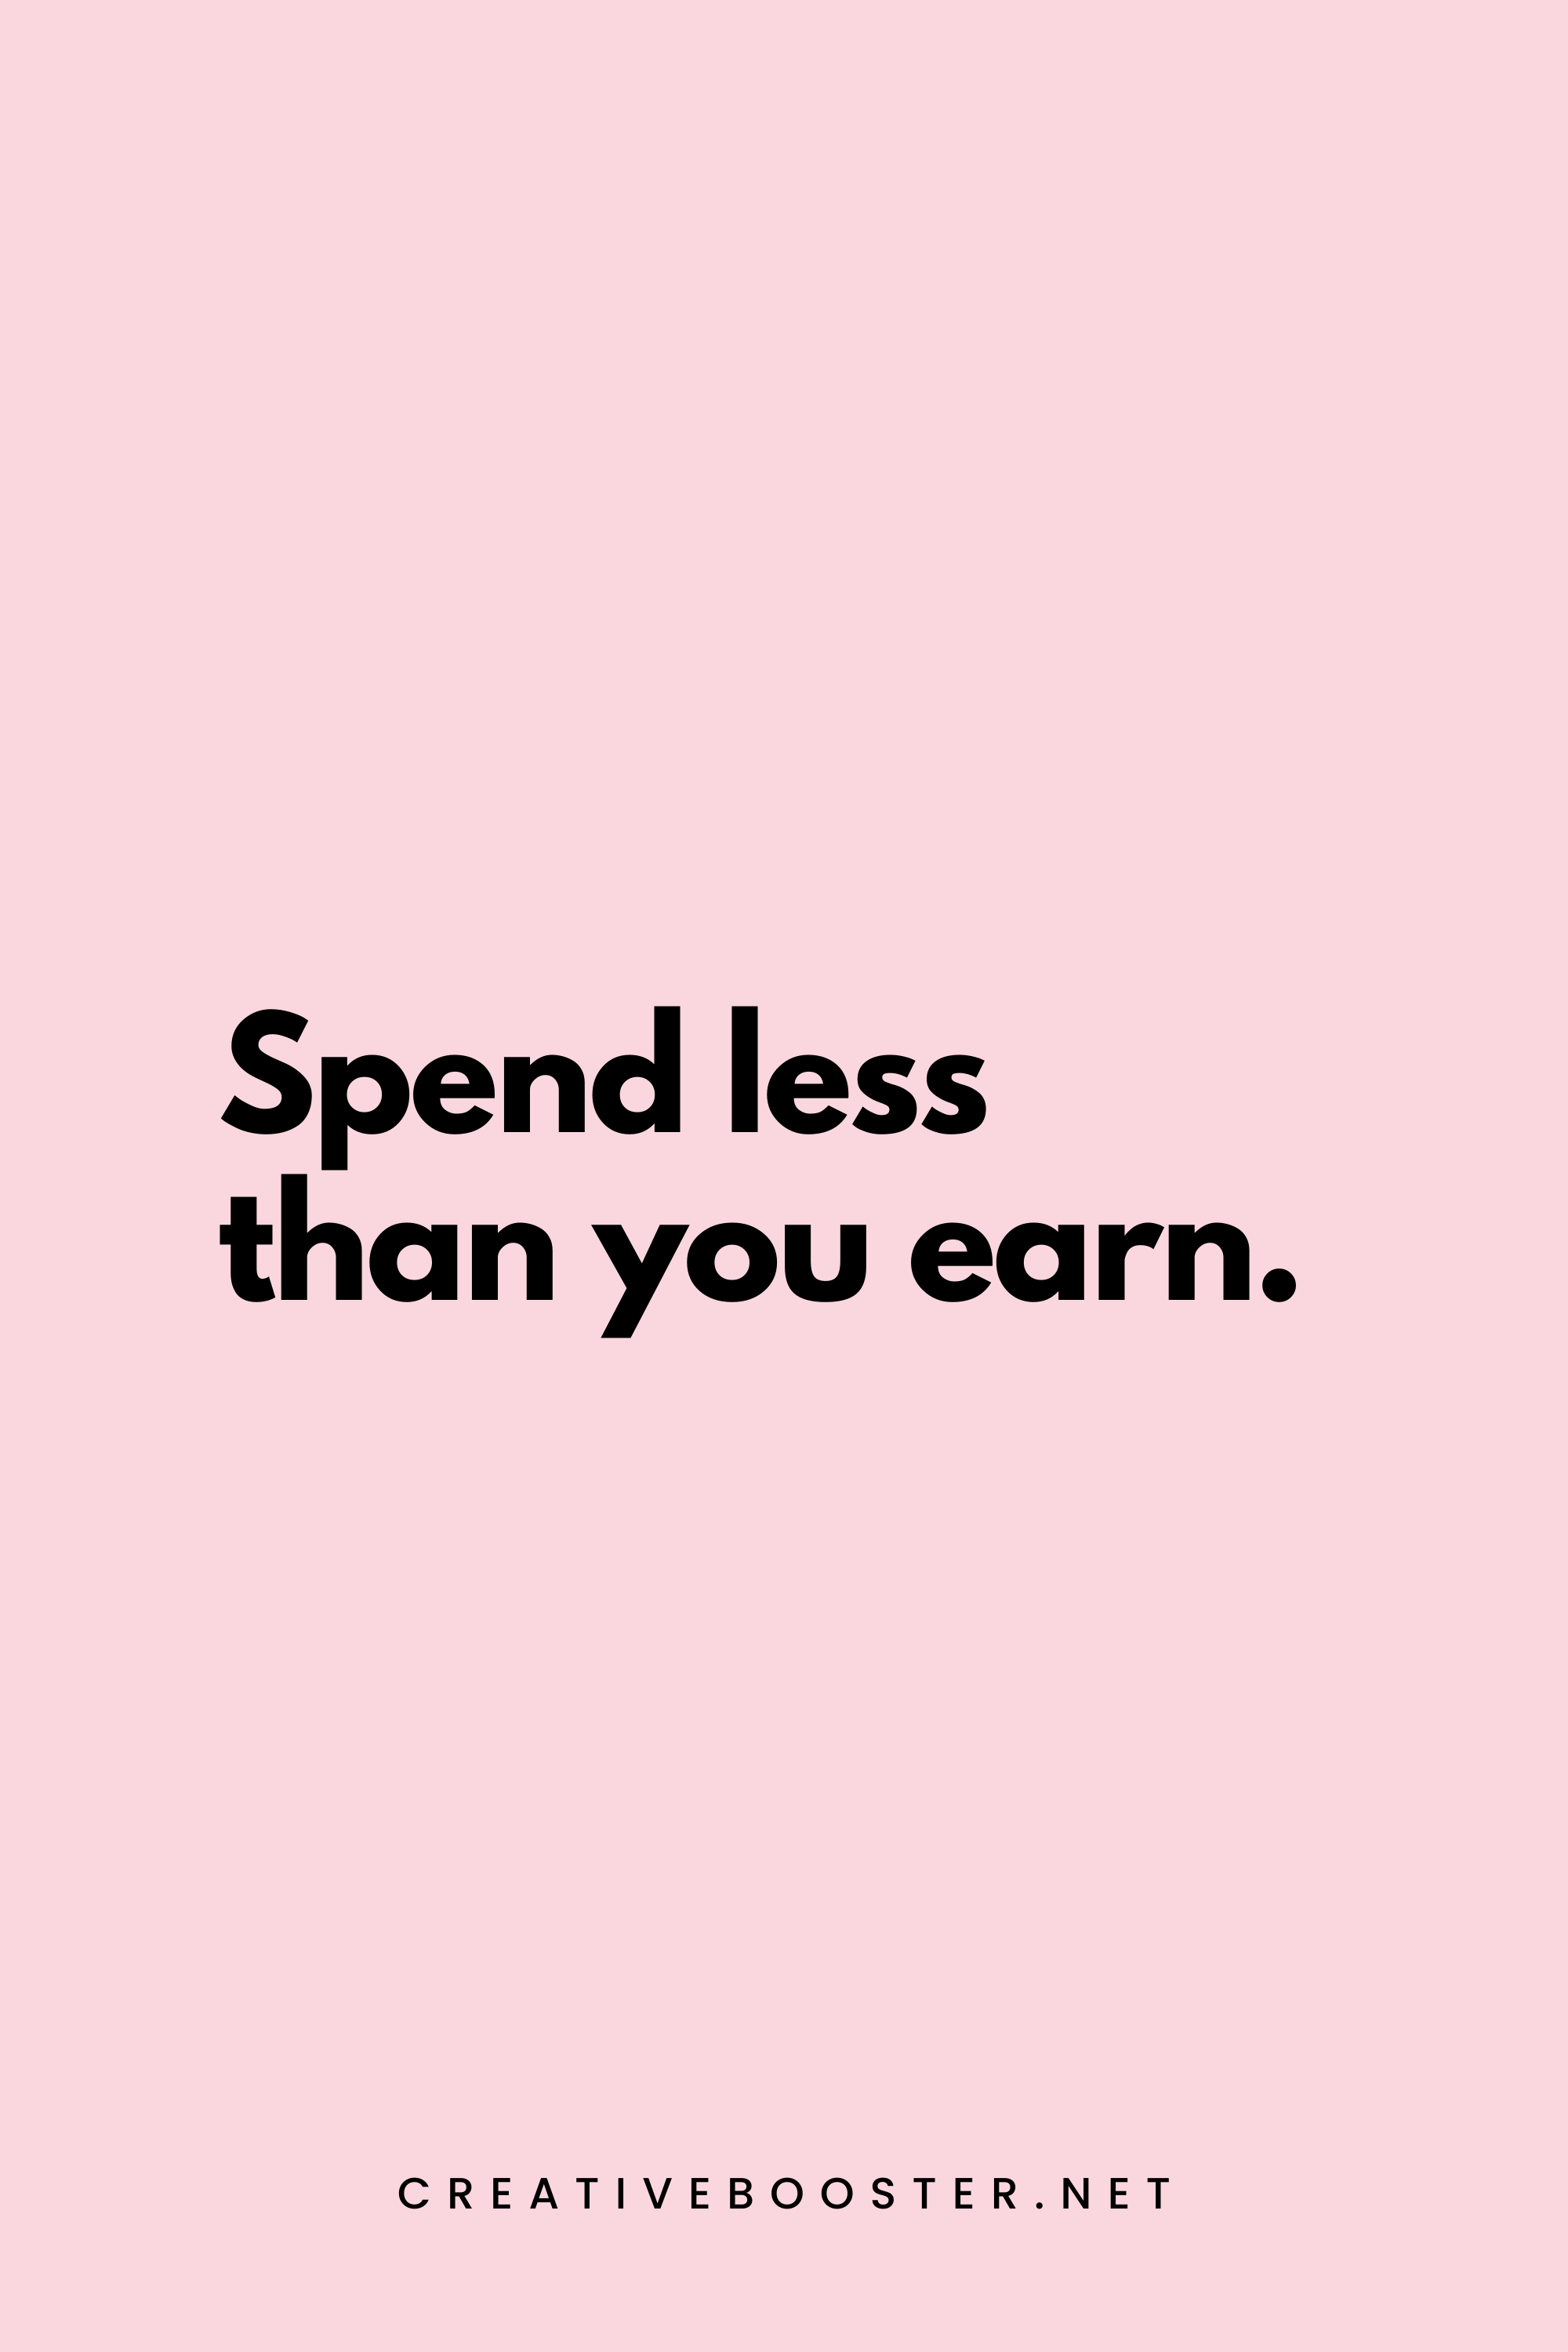 26. Spend less than you earn. - Unknown - 2. Short Financial Freedom Quotes